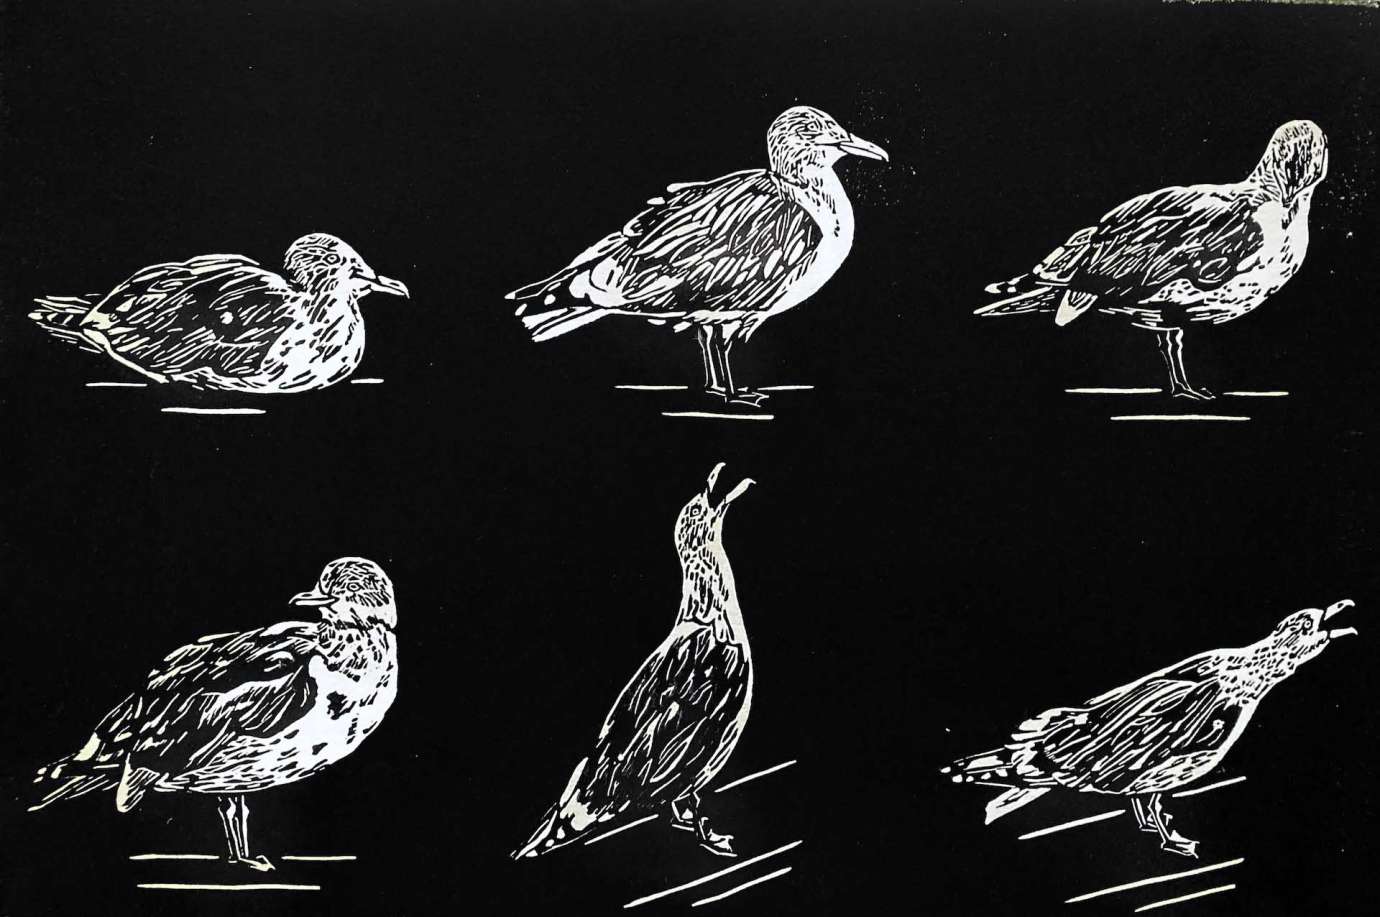 A print by Sydney McBride of 6 white seagulls on a black background